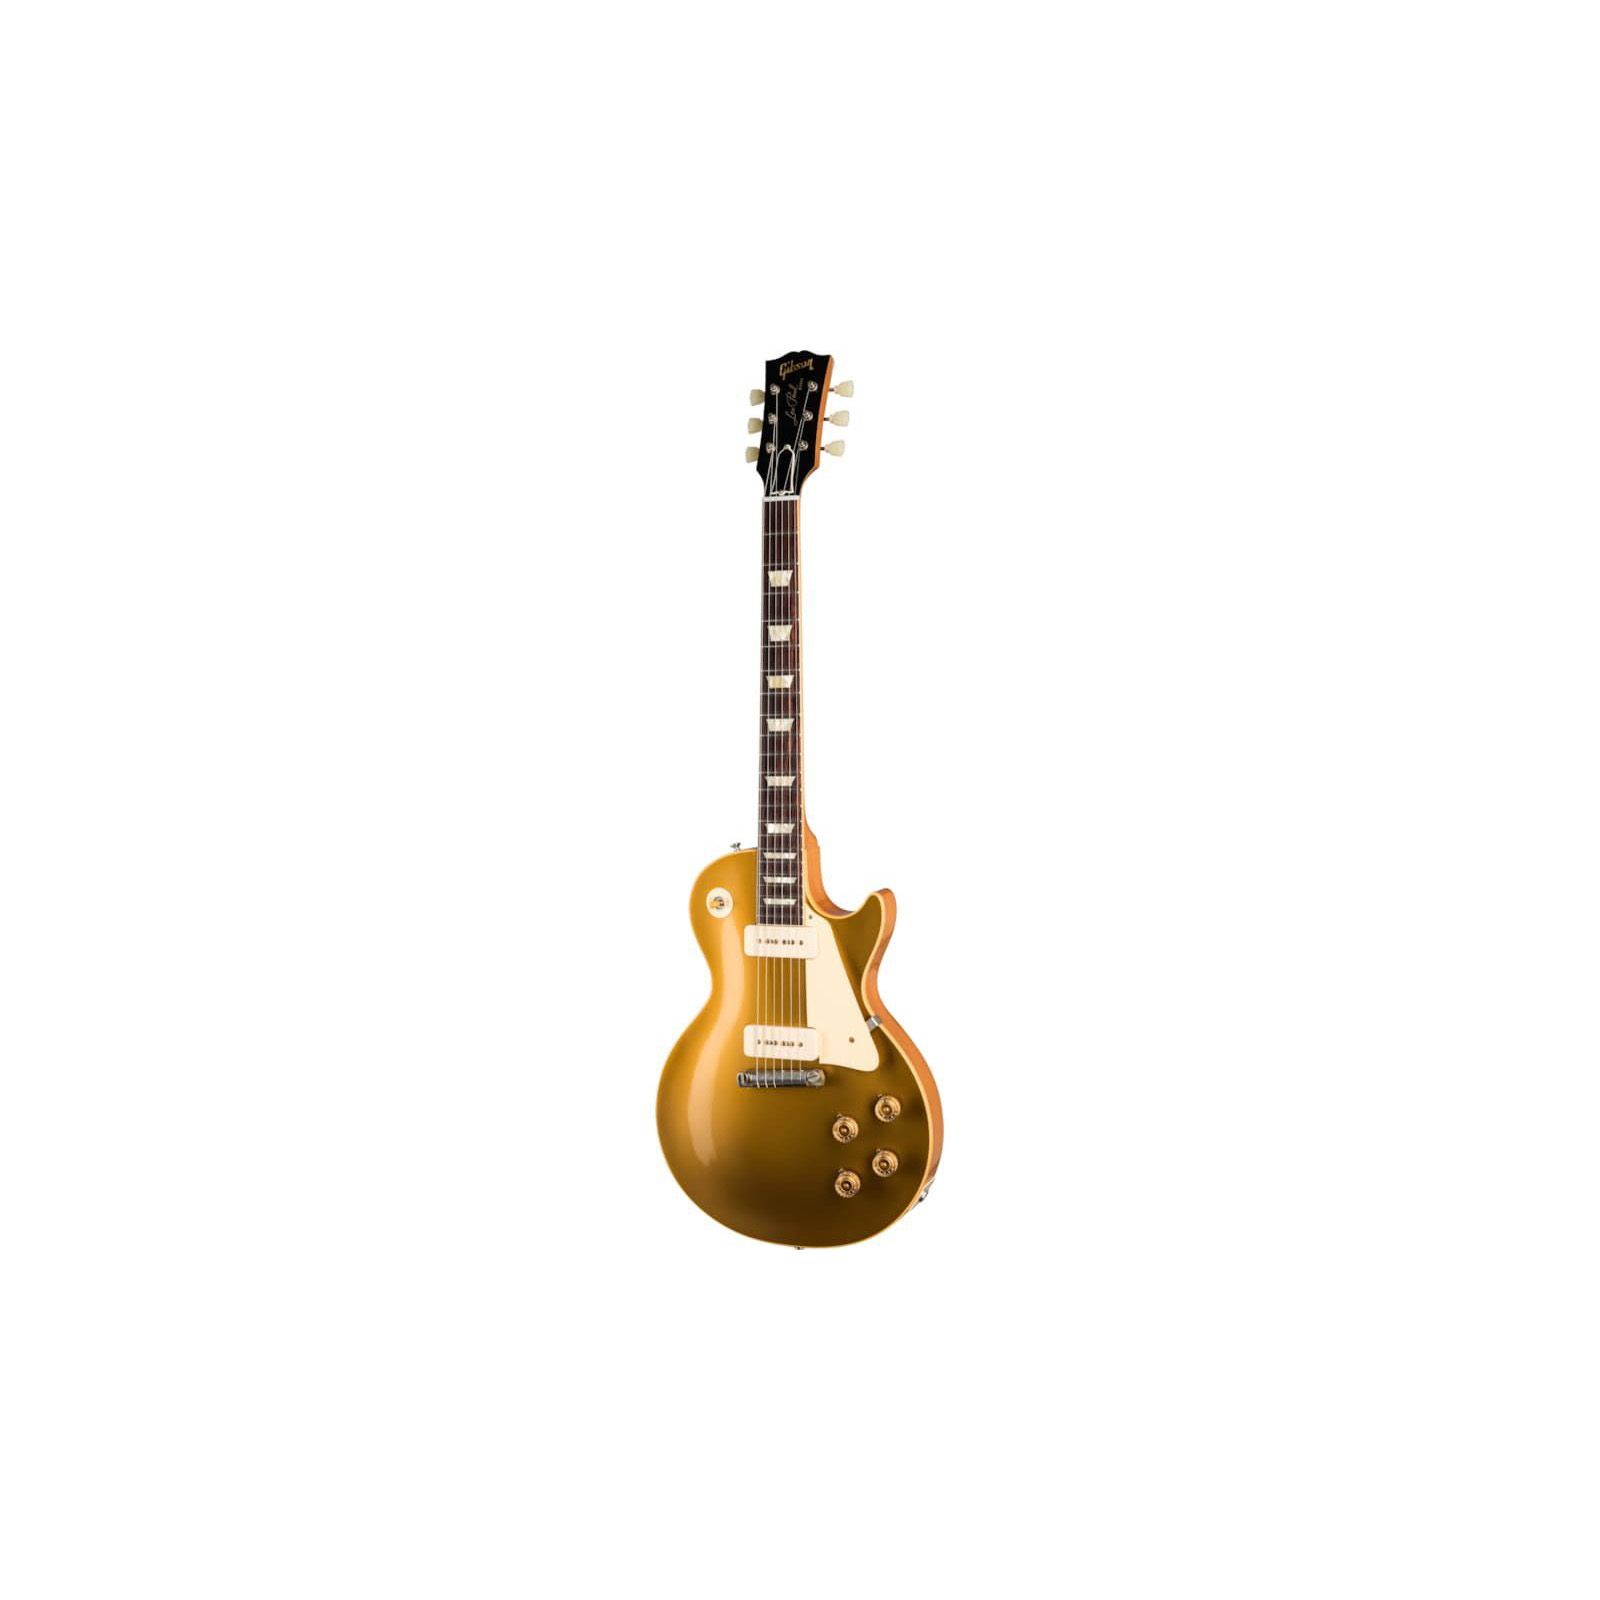 Gibson 1954 Les Paul Goldtop Reissue VOS Double Gold Электрогитары